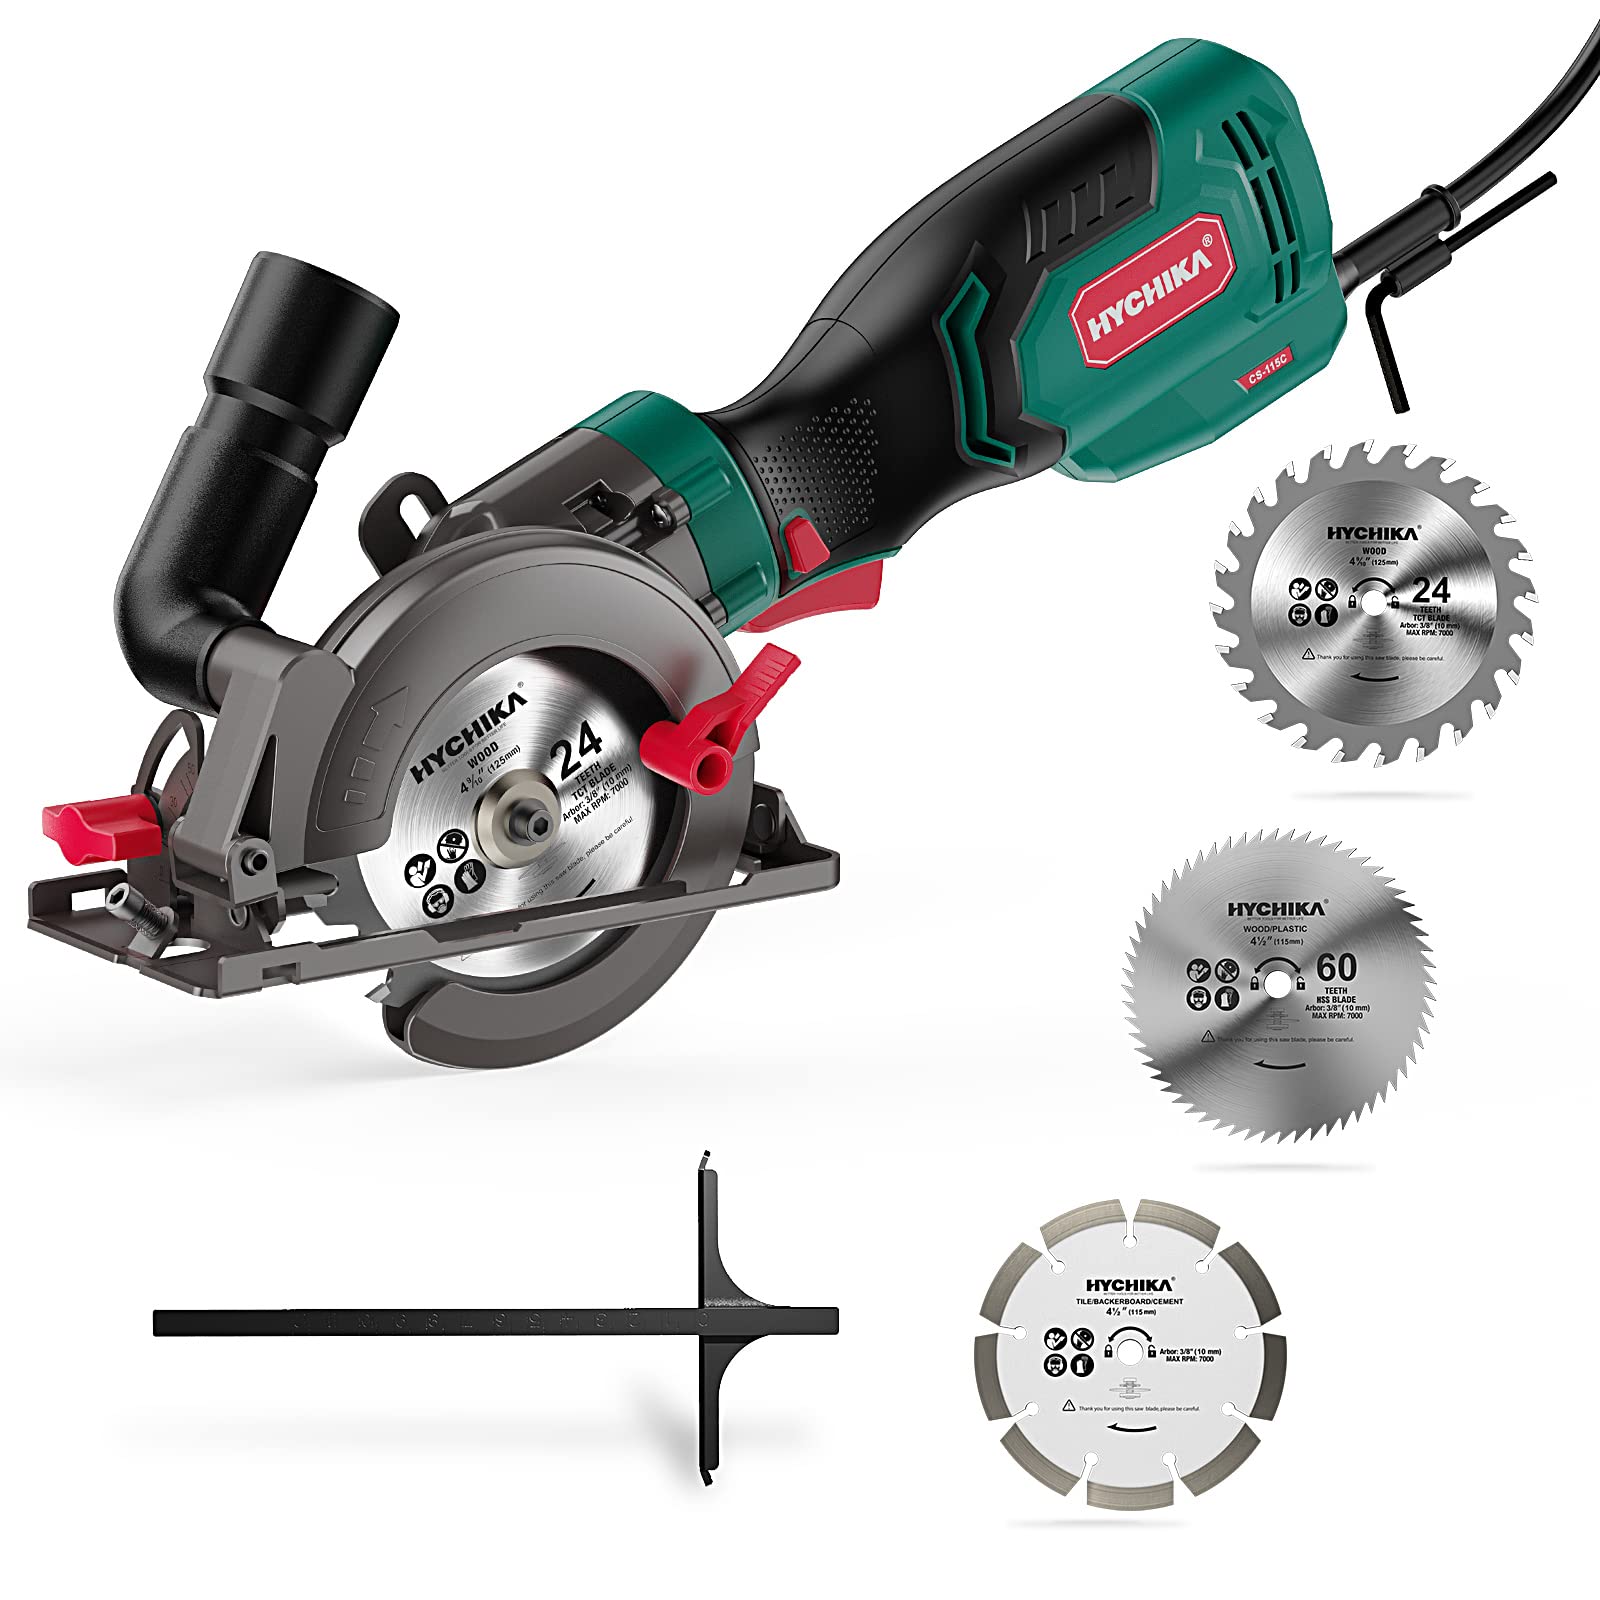 How Does a Cordless Circular Saw for Metal Differ from One for Wood?